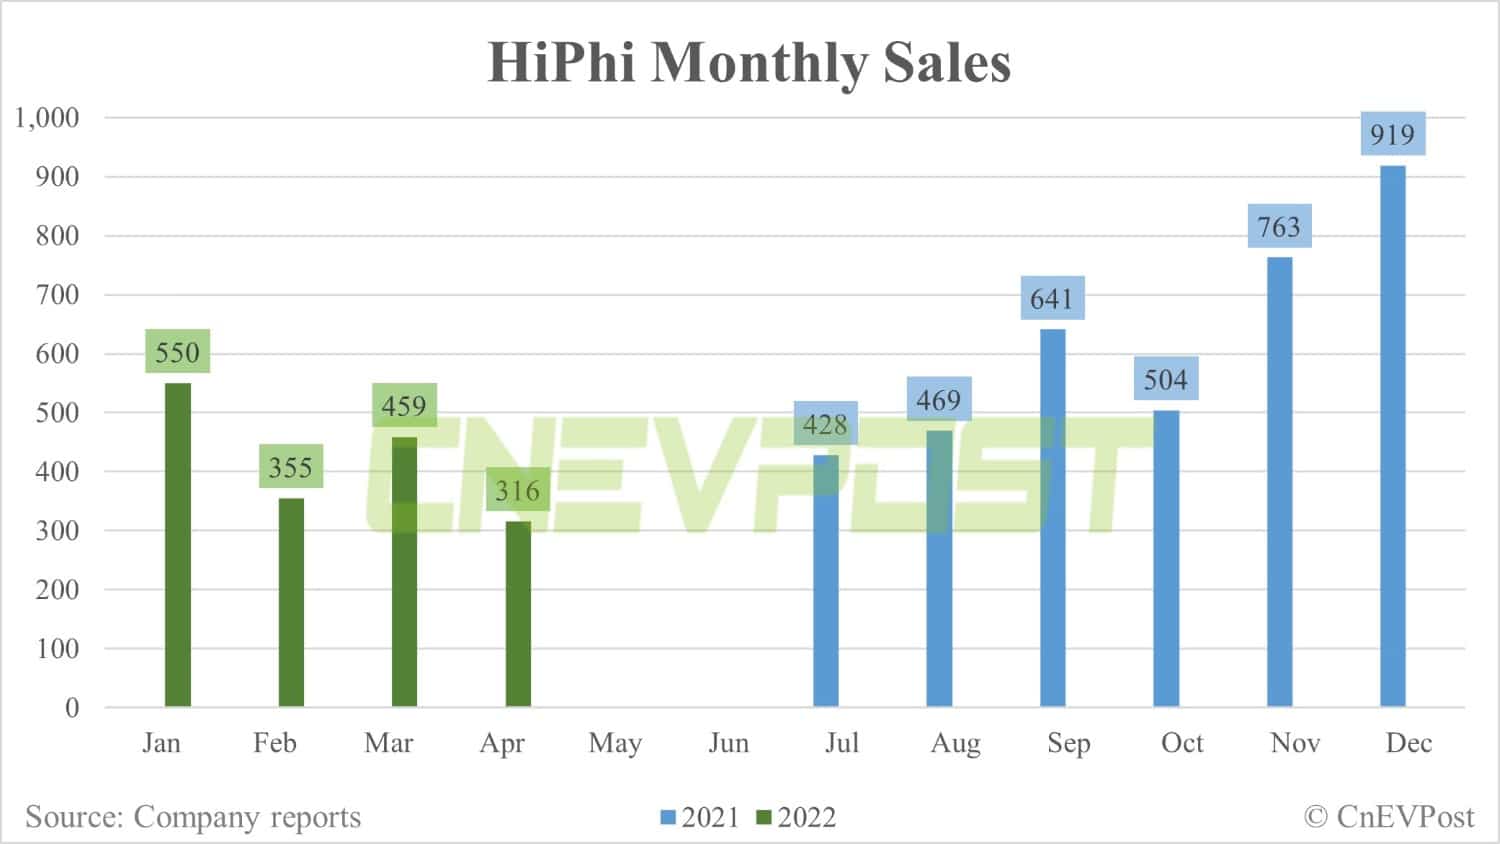 HiPhi sells 316 units in April, down 31% from March-CnEVPost